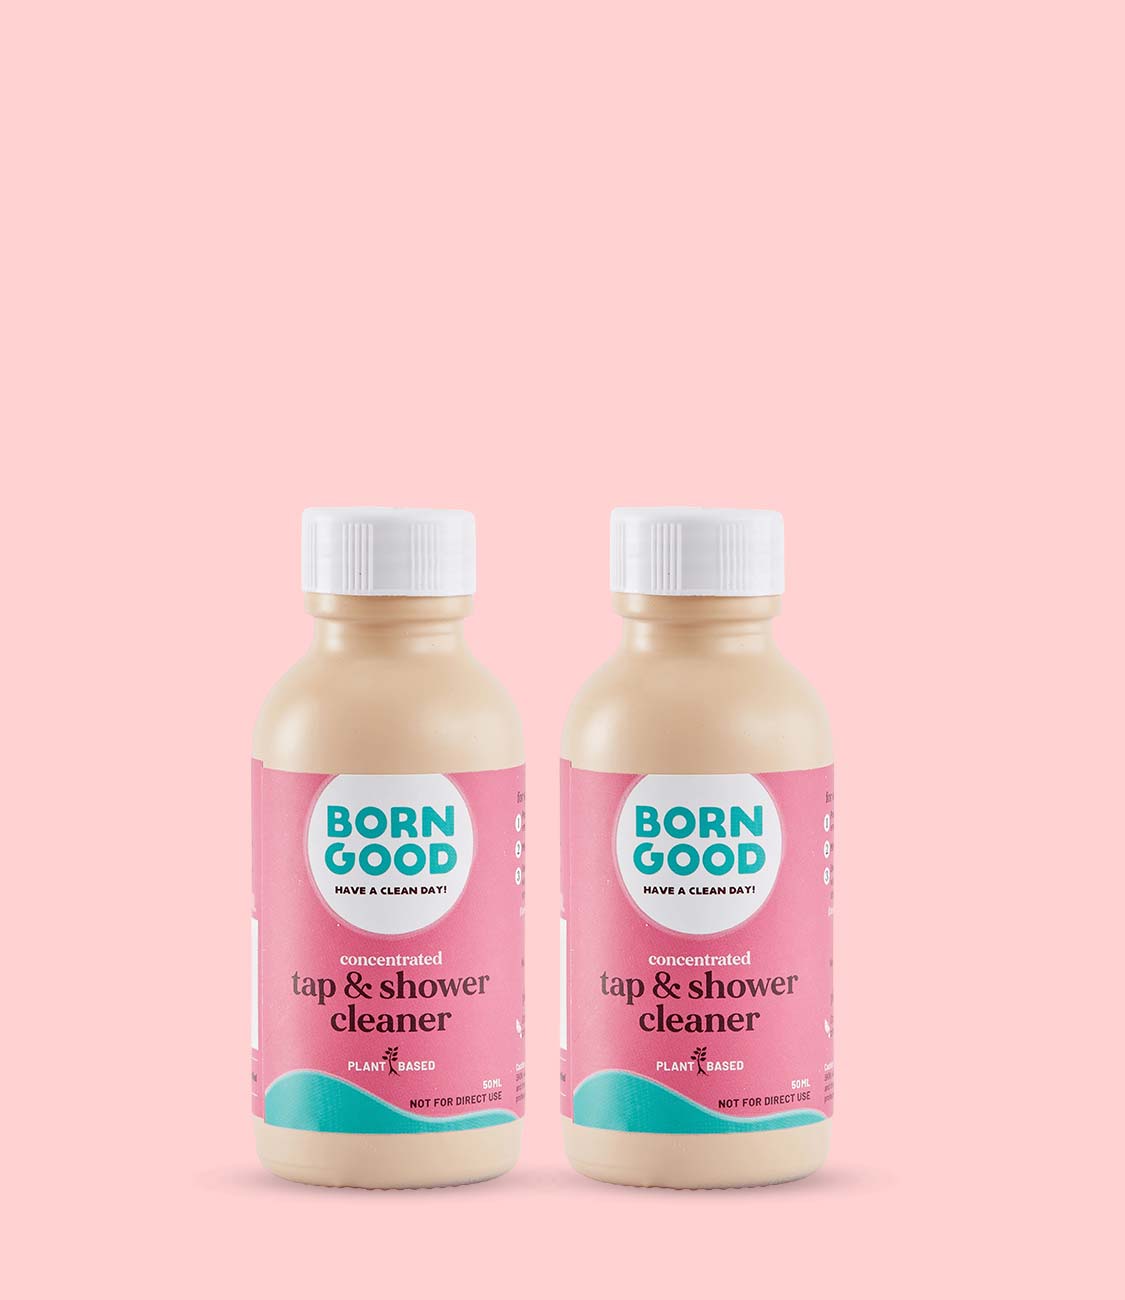 Born Good Plant-based Tap & Shower Cleaner Concentrate 50ml x 2 (Makes 1 L)